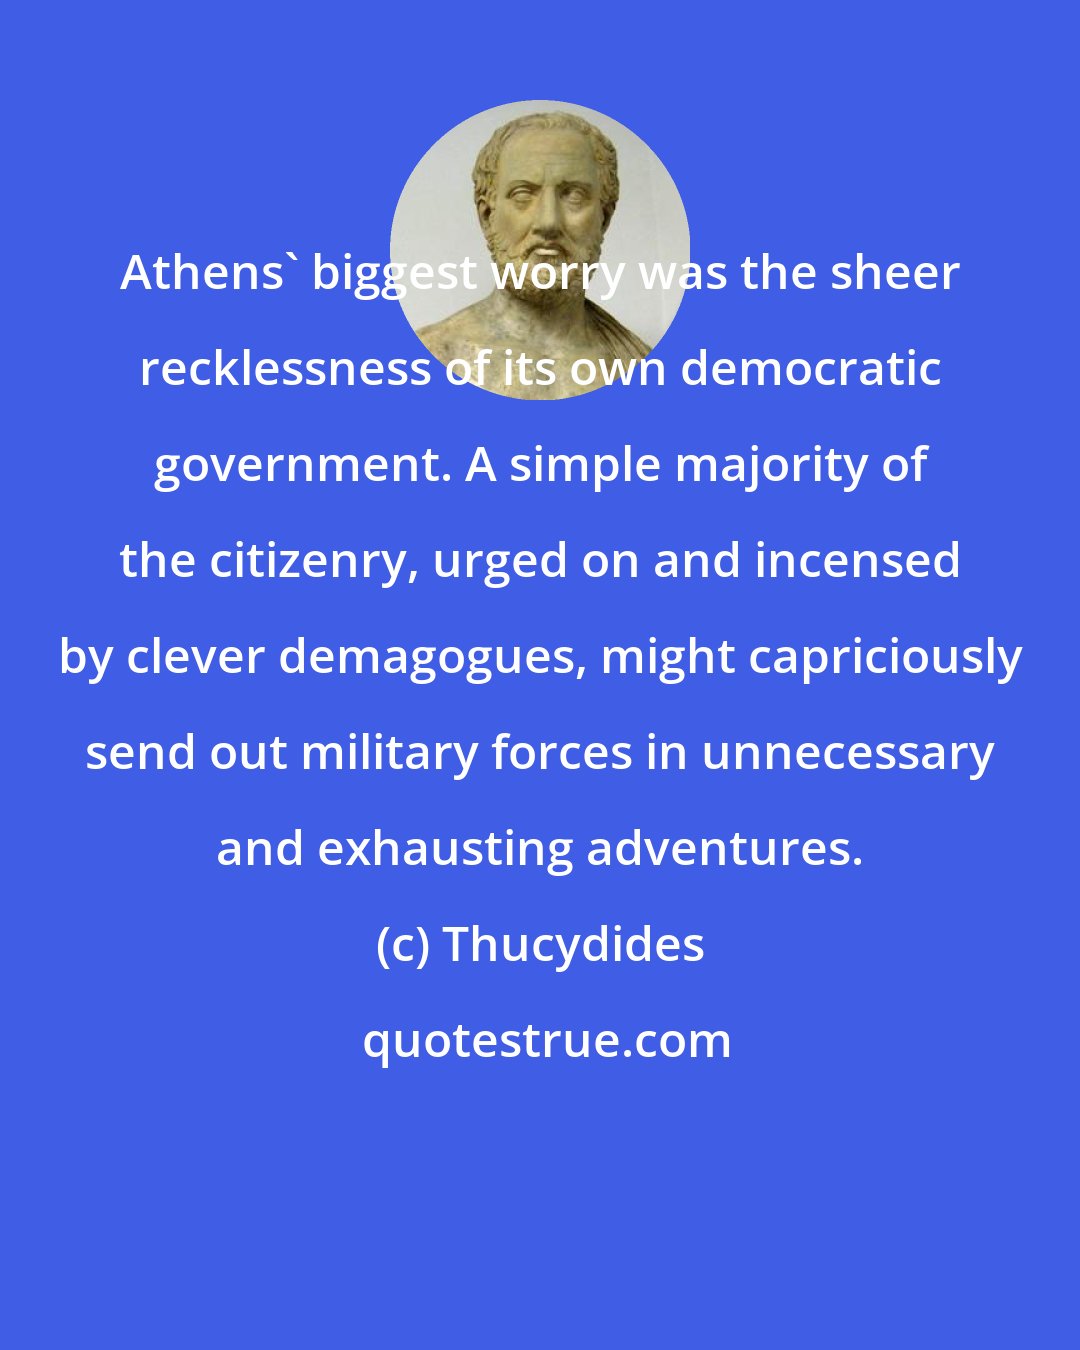 Thucydides: Athens' biggest worry was the sheer recklessness of its own democratic government. A simple majority of the citizenry, urged on and incensed by clever demagogues, might capriciously send out military forces in unnecessary and exhausting adventures.